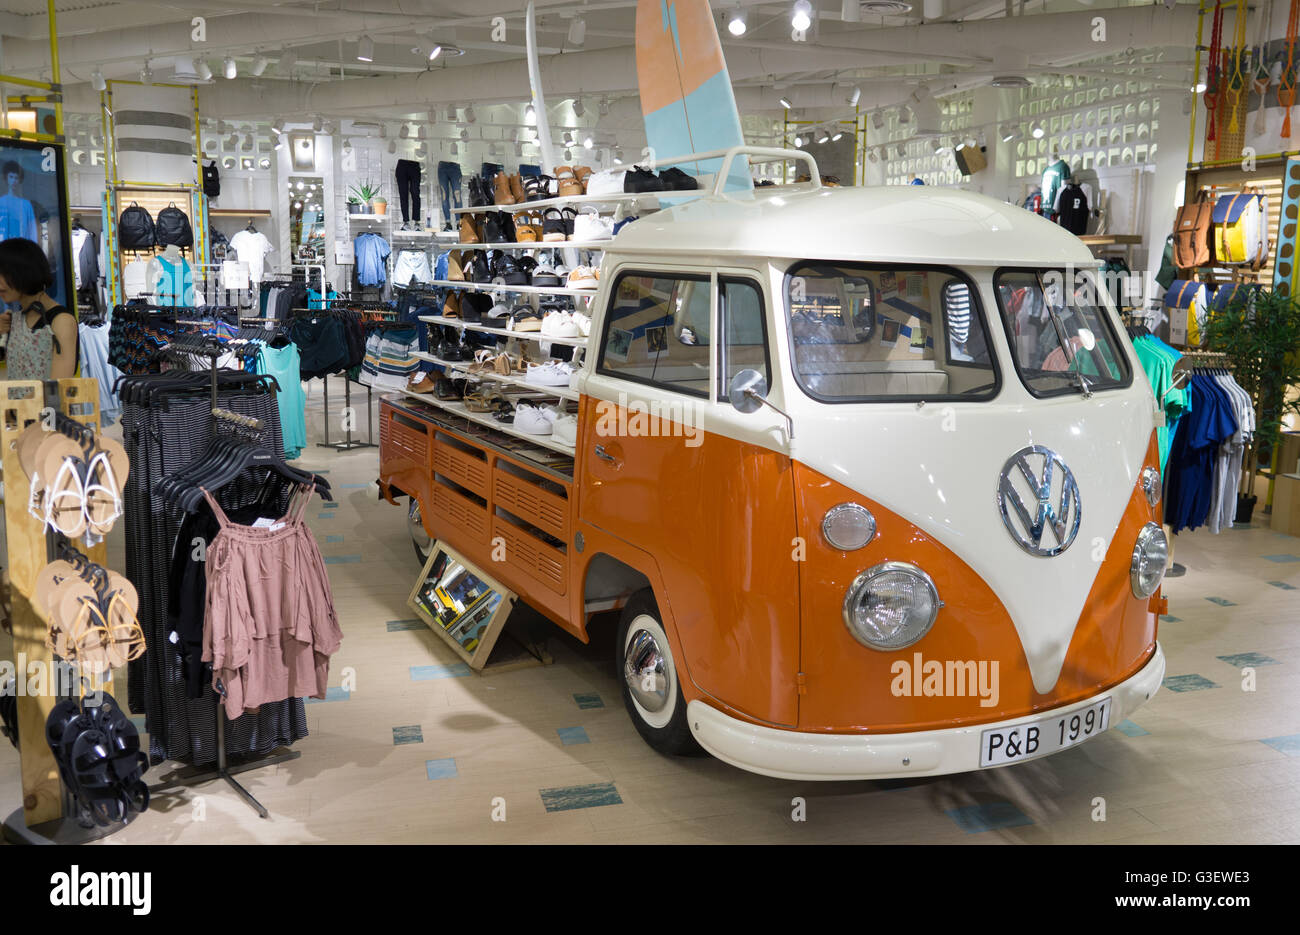 A Classic Volkswagen Camper Van used in a retail environment within a Stock  Photo - Alamy